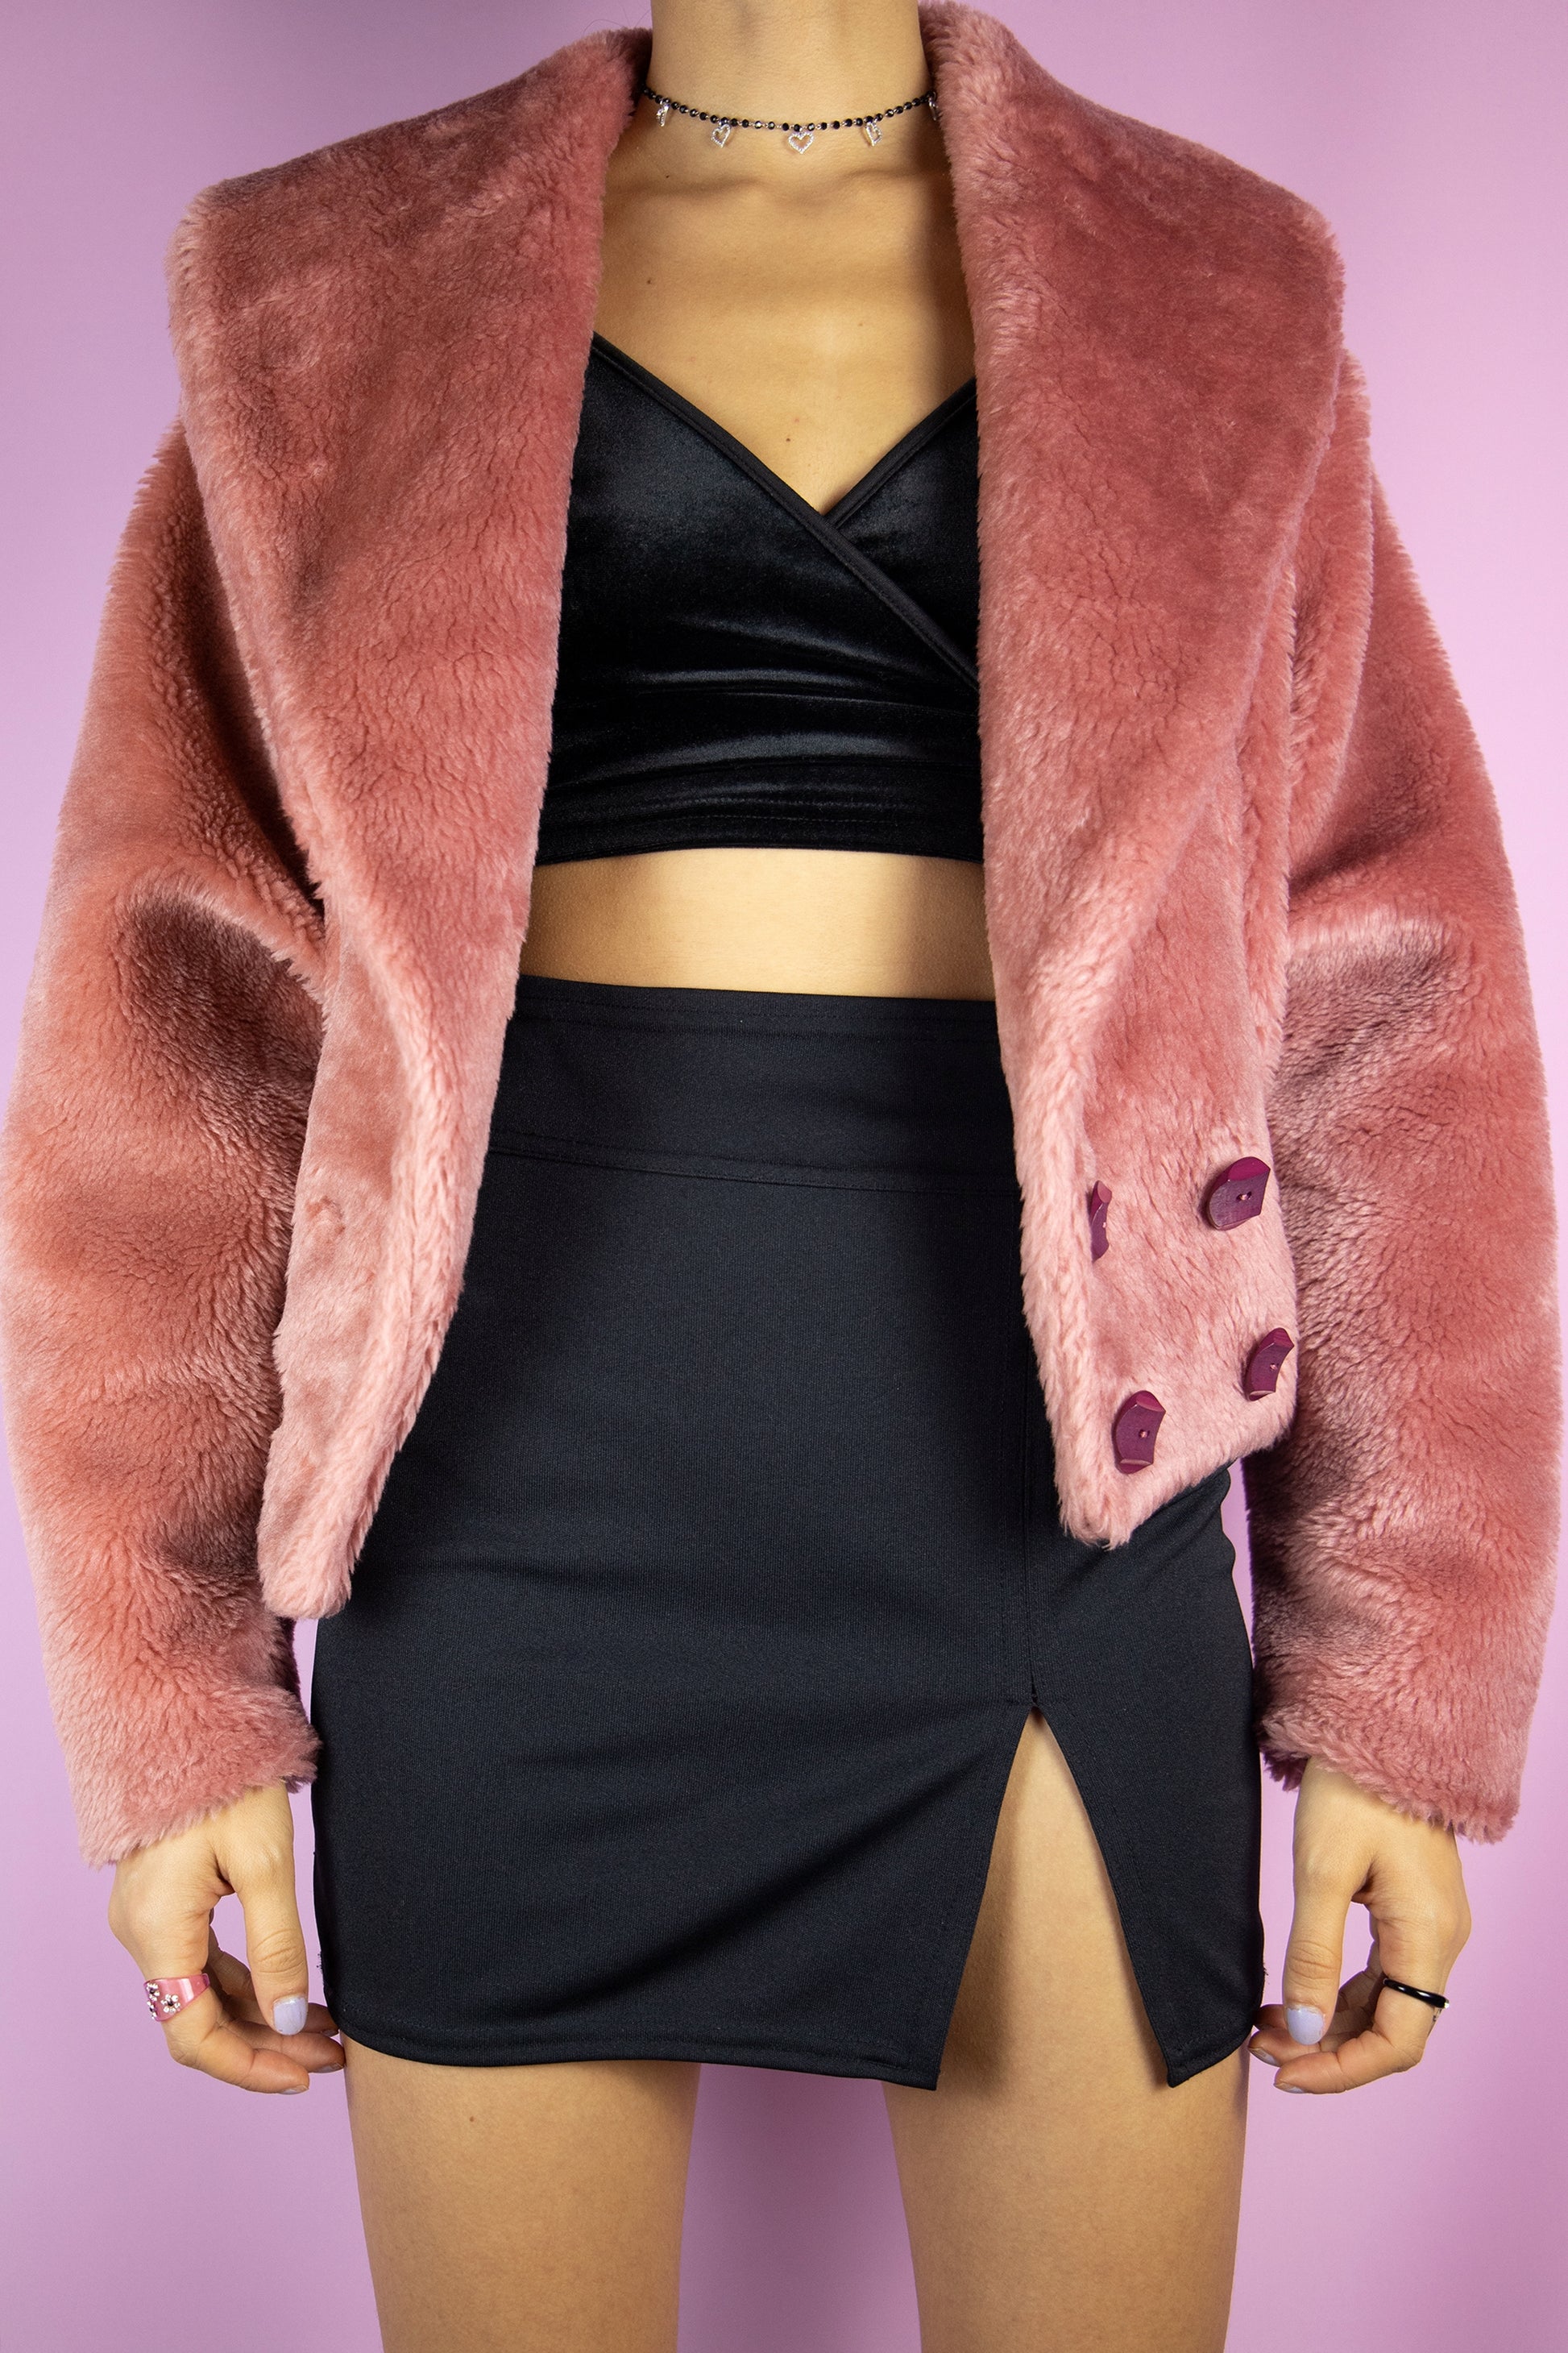 The Vintage 90s Pink Faux Fur Jacket is a pastel dusty pink faux fur jacket with a collar, buttons, pockets and elasticated waist. Romantic boho retro 1990s winter statement coat.